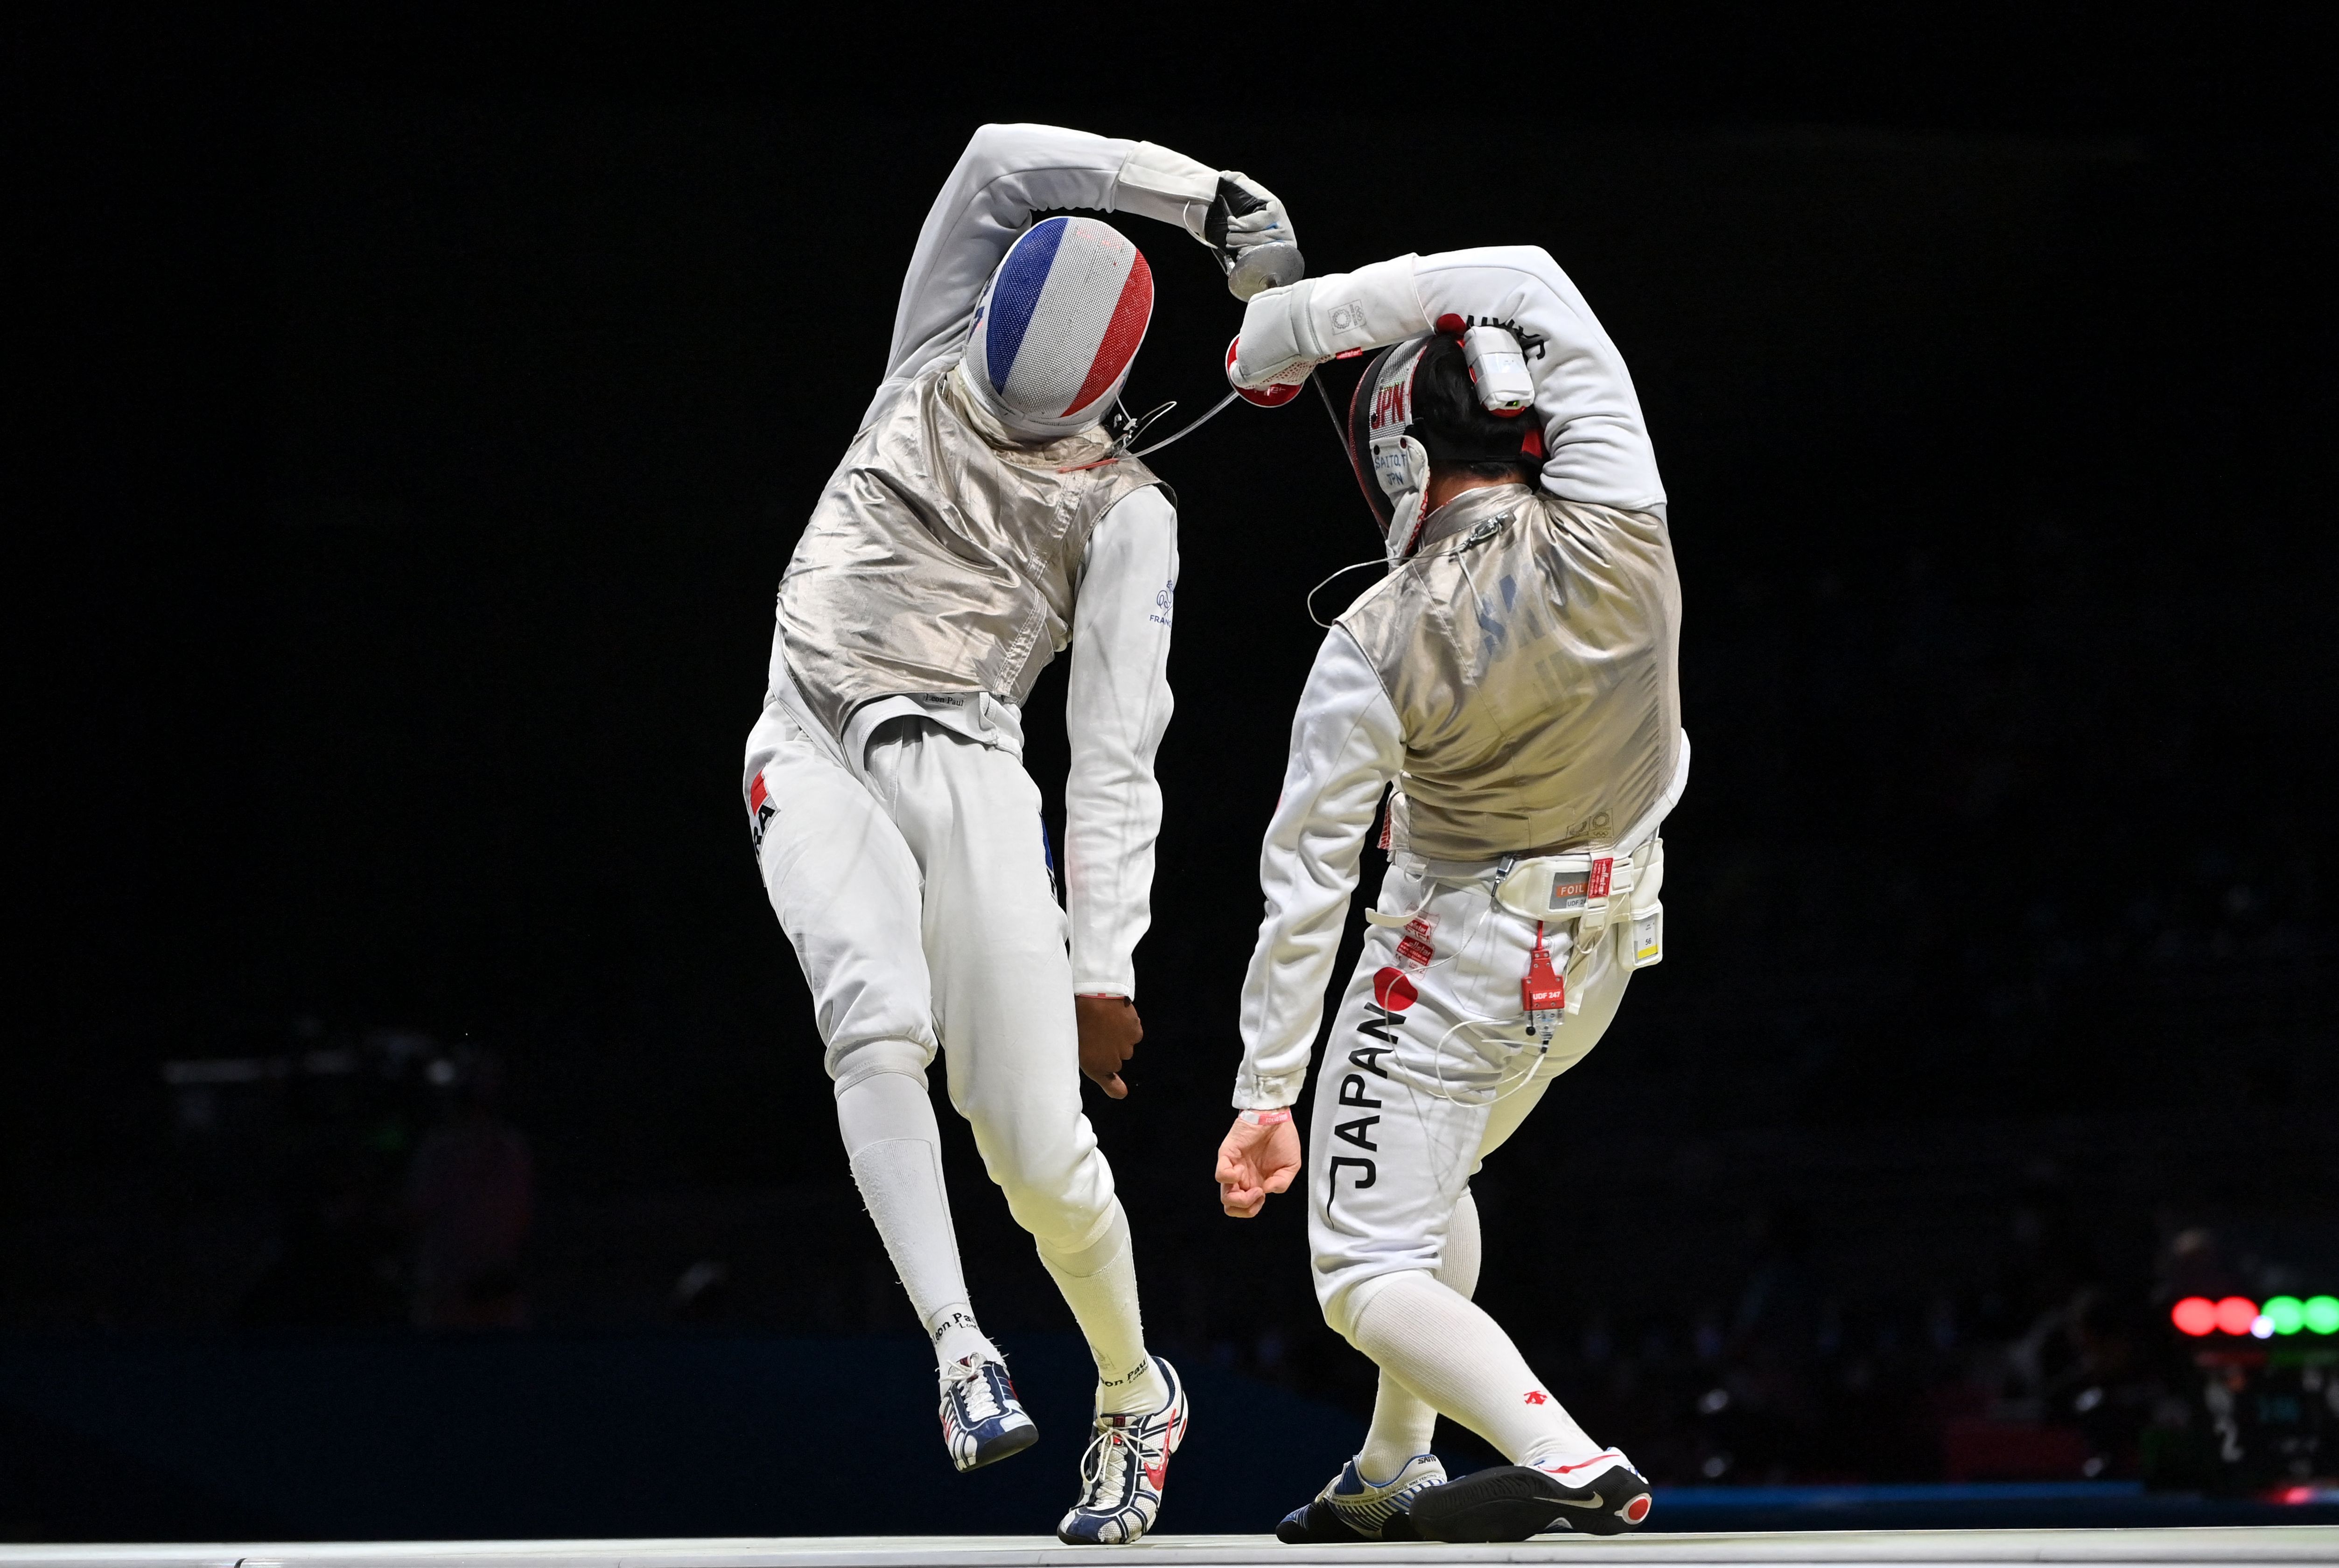 France's Enzo Lefort (L) compete against Japan's Toshiya Saito in the mens individual foil qualifying bout during the Tokyo 2020 Olympic Games 